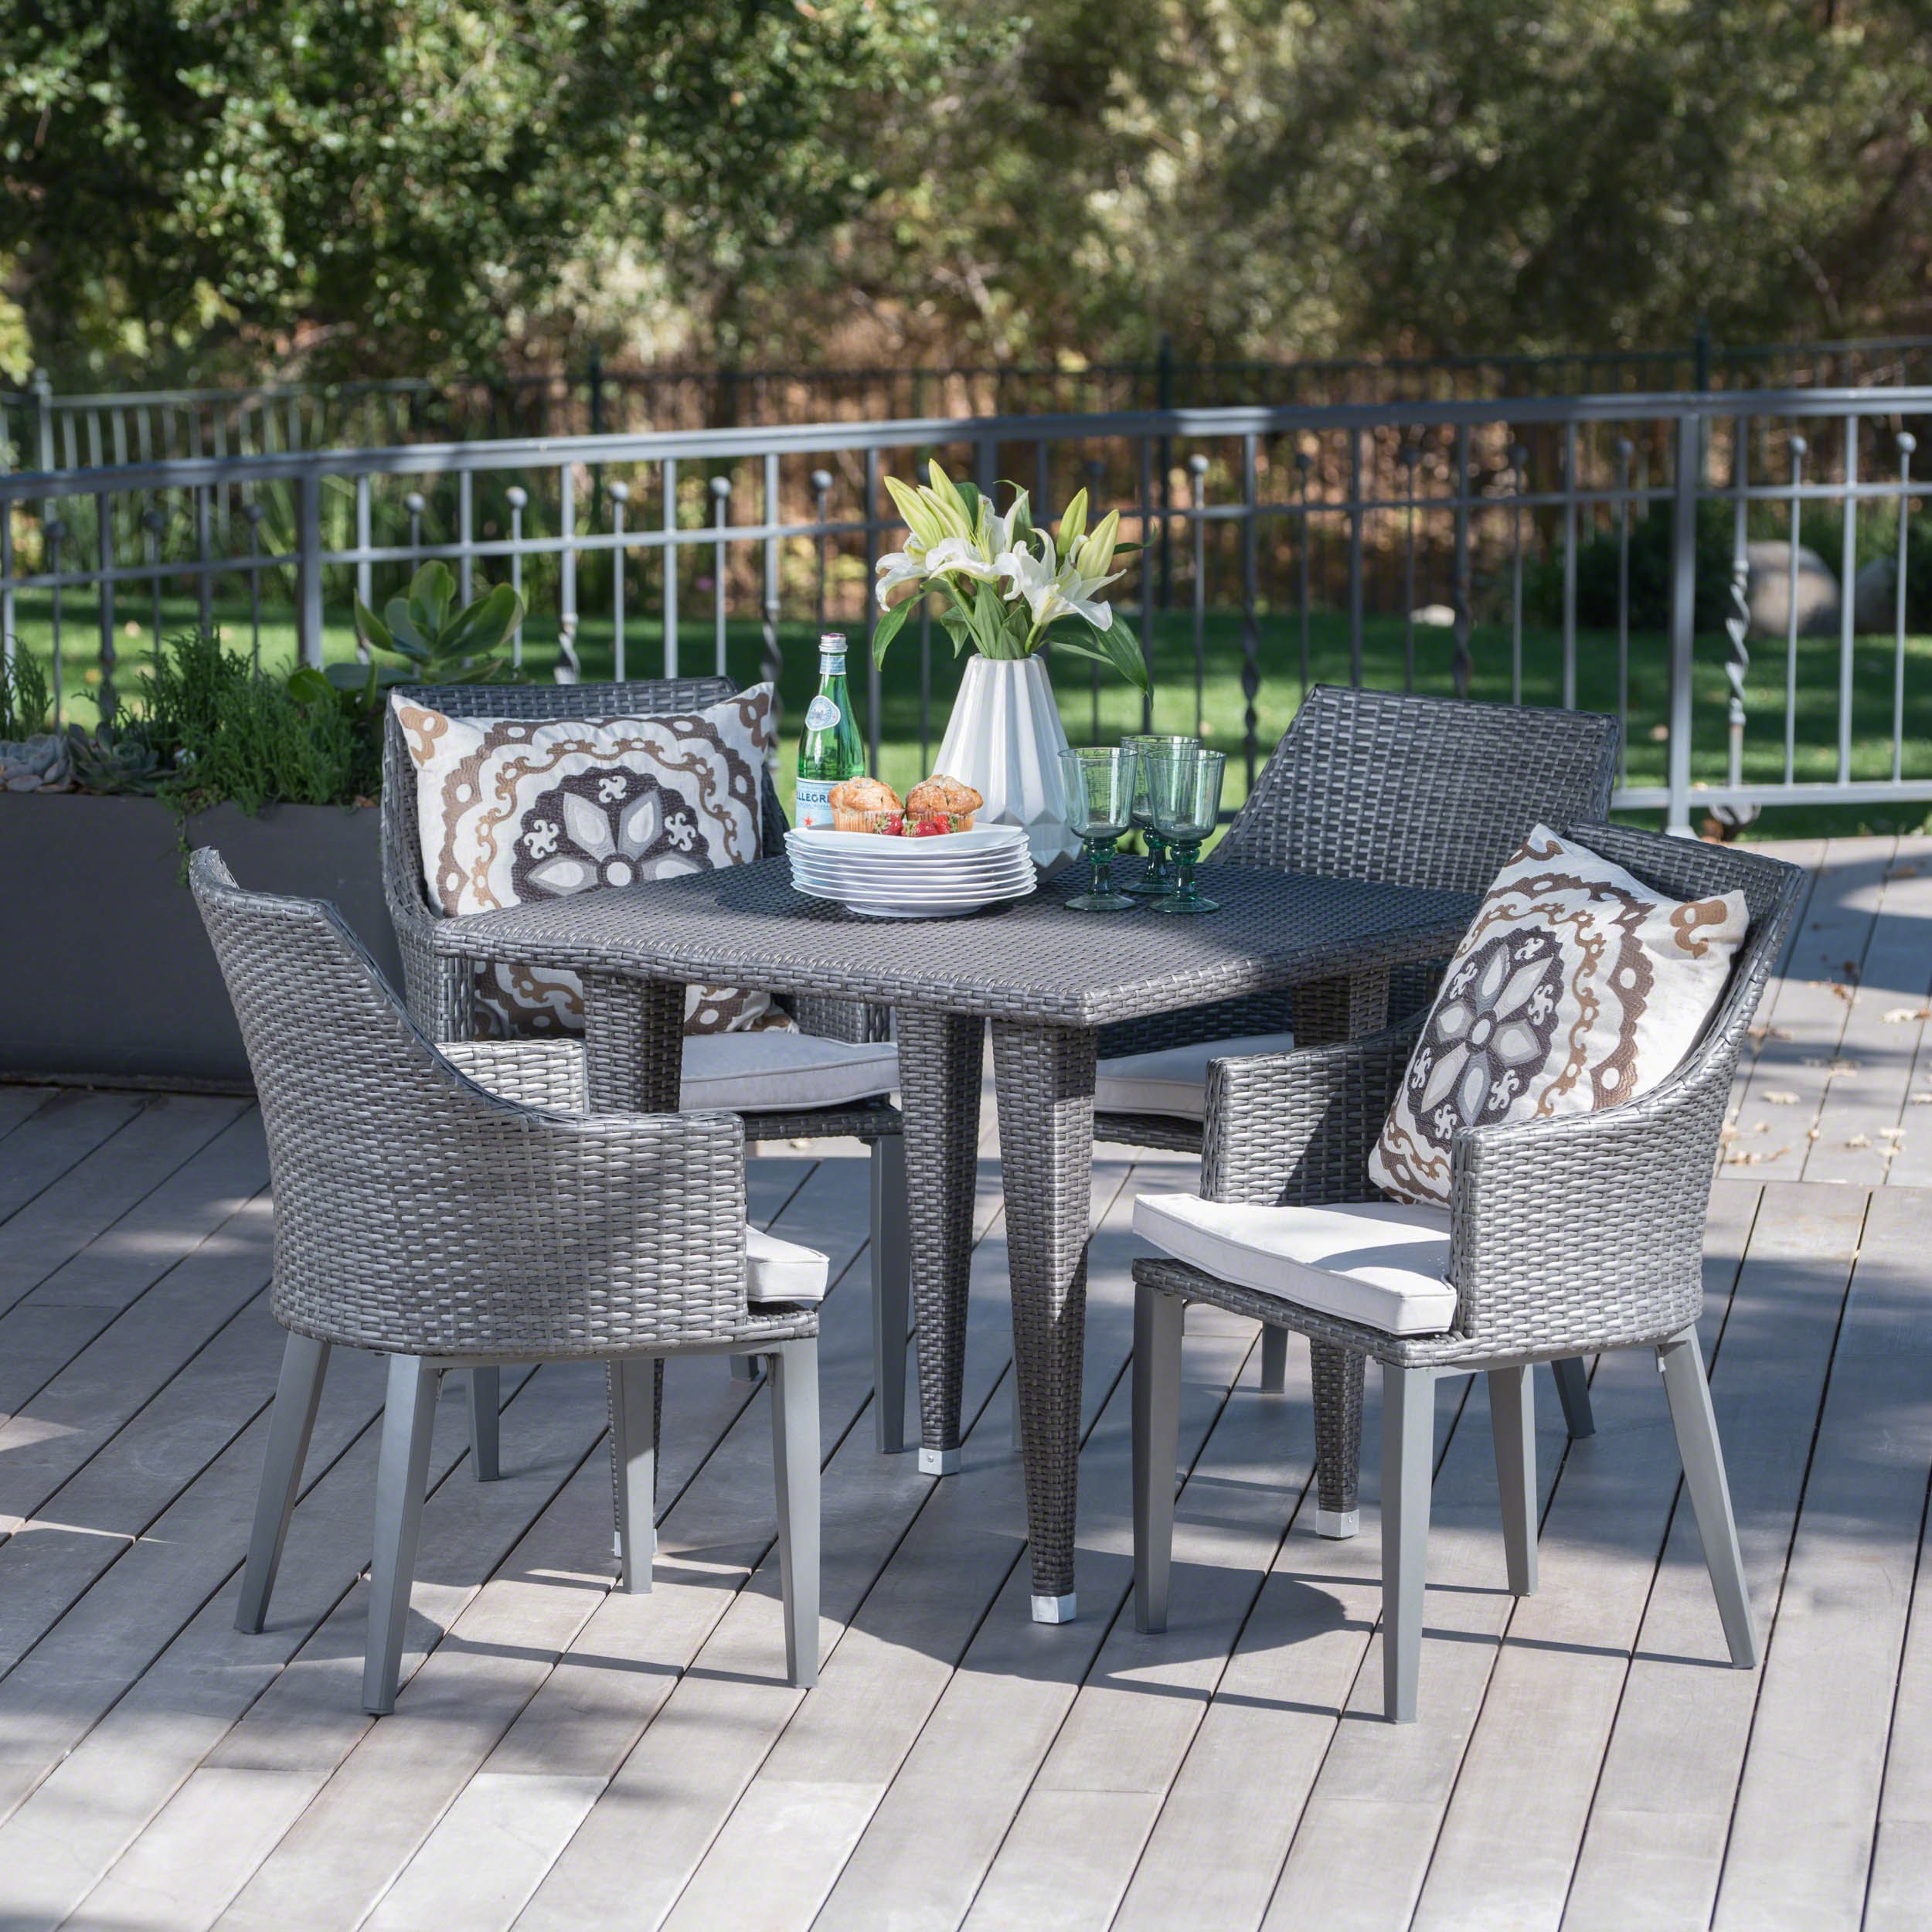 Lenox Outdoor 5-piece Square Wicker Dining Set With Cushions By Christopher Knight Home